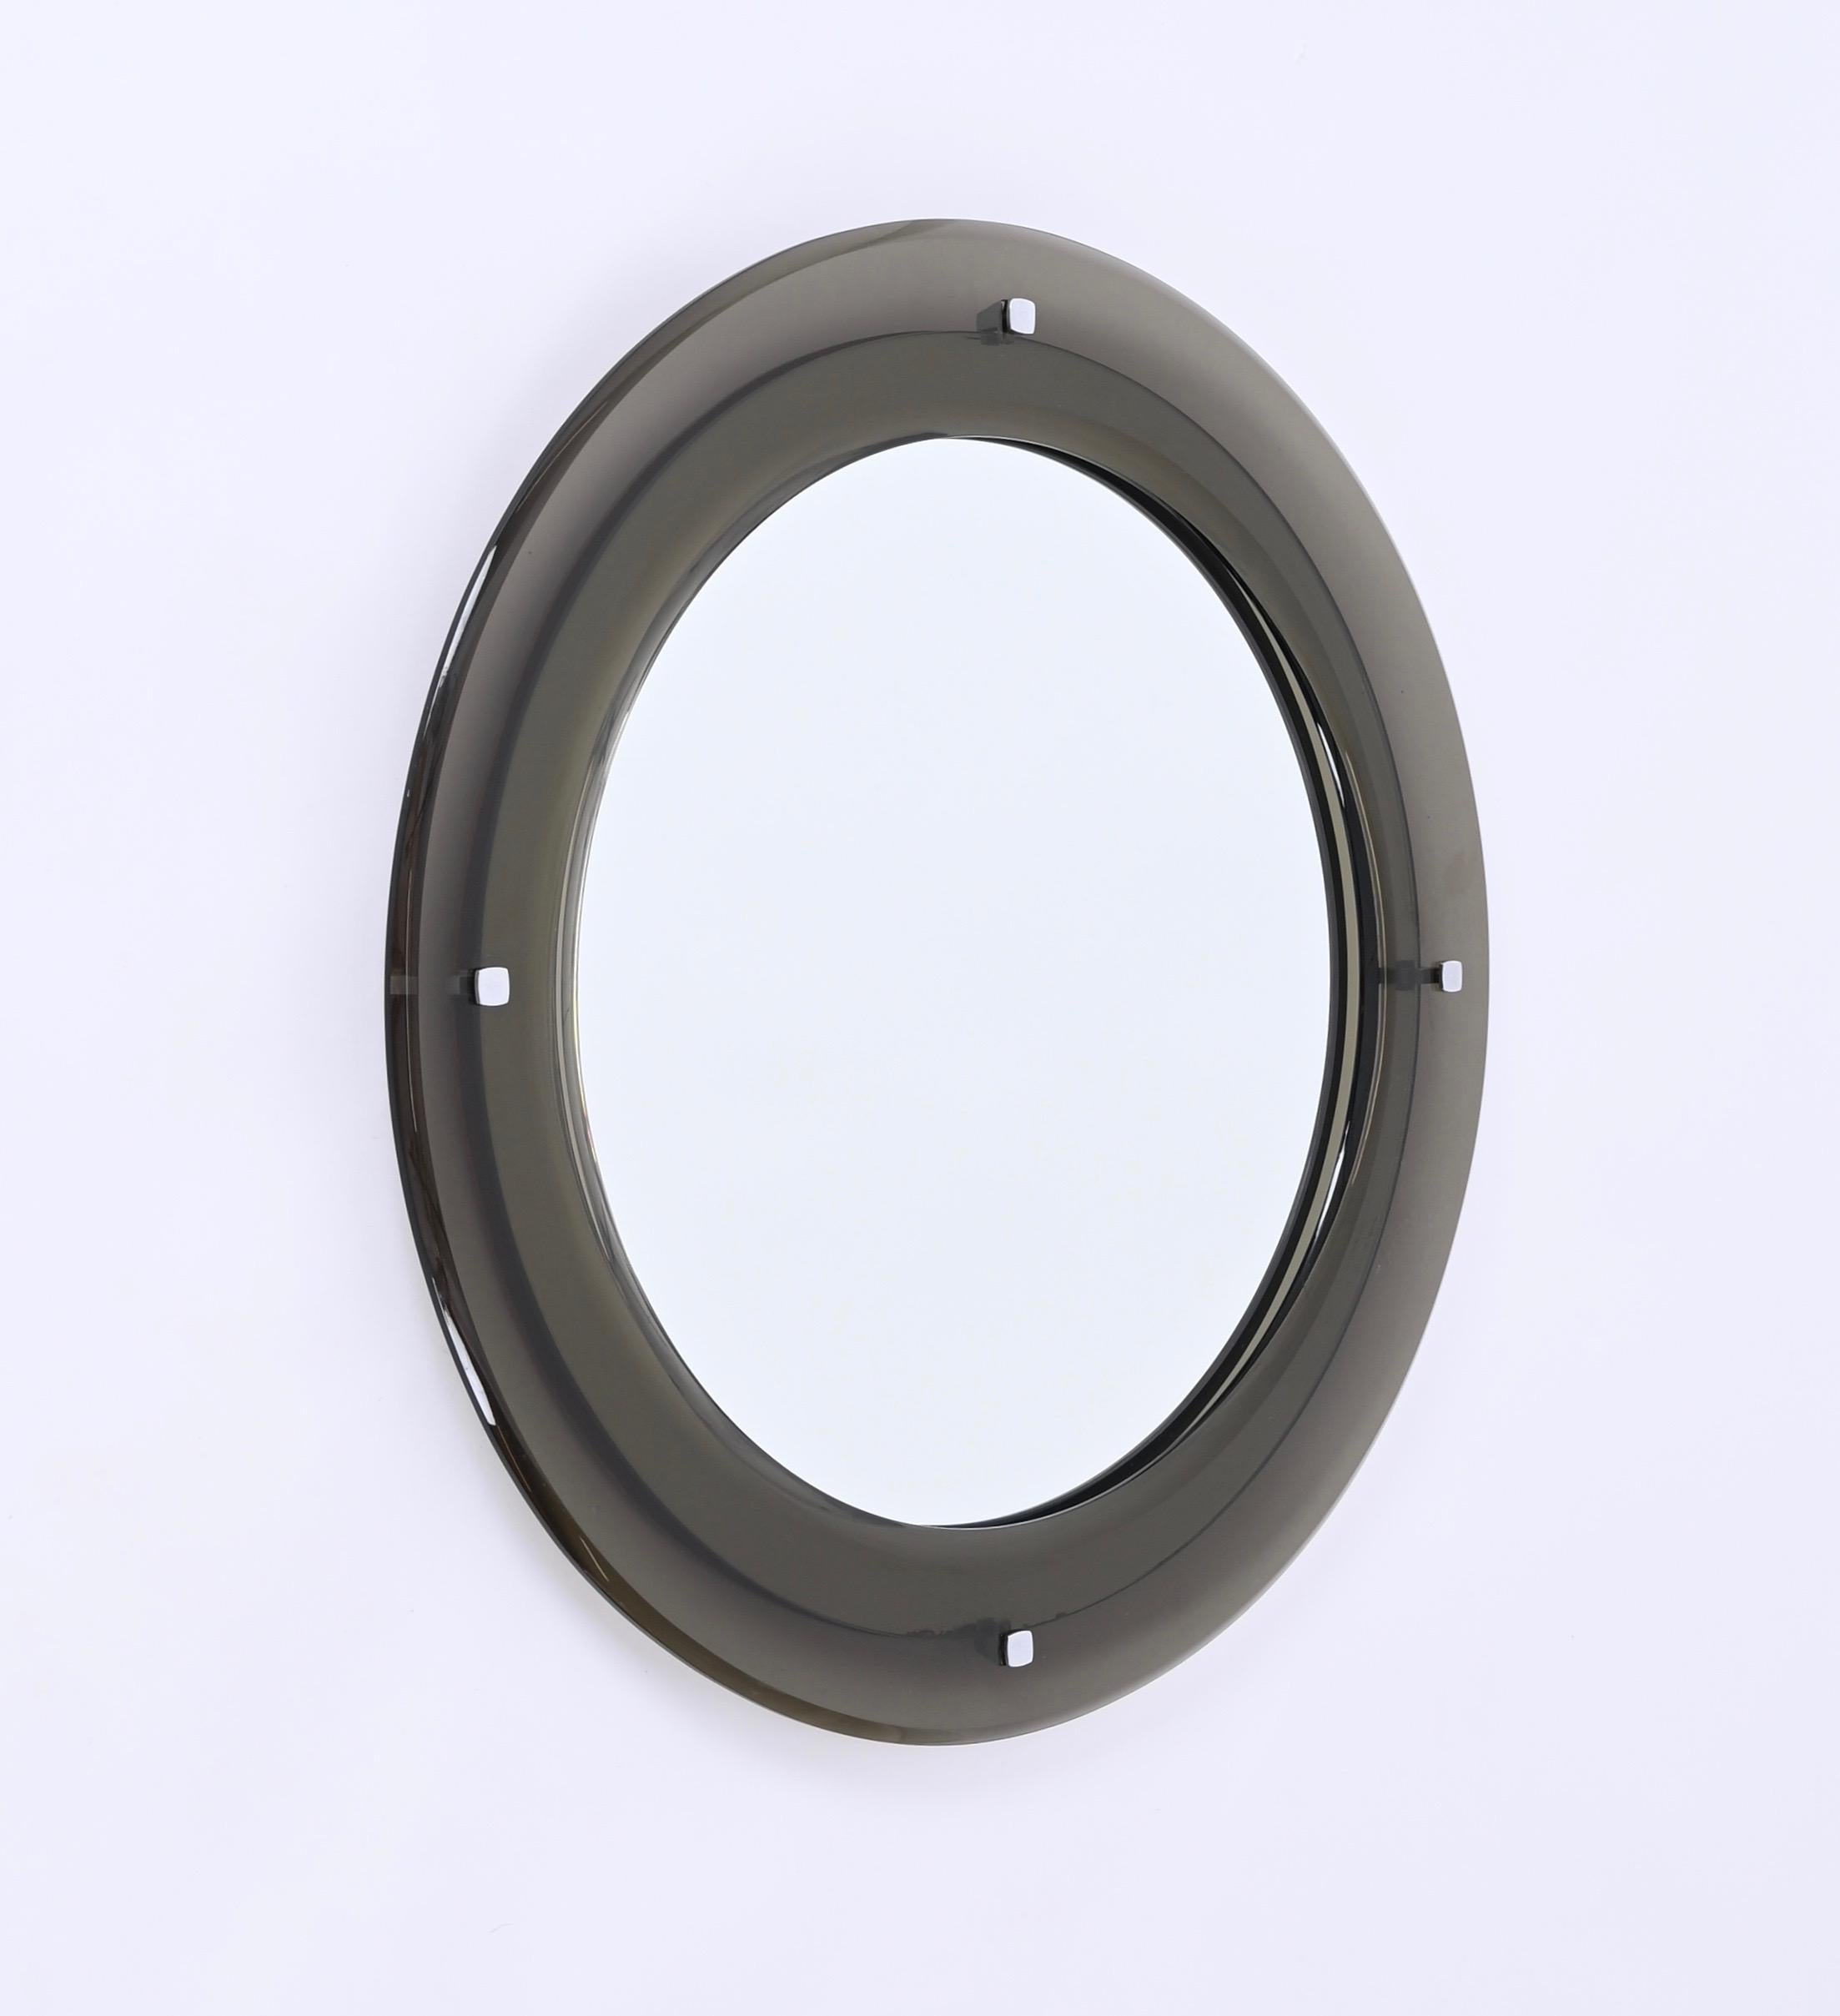 Midcentury Italian Round Mirror with Beveled Smoked Glass by Sena Cristal, 1970s For Sale 13